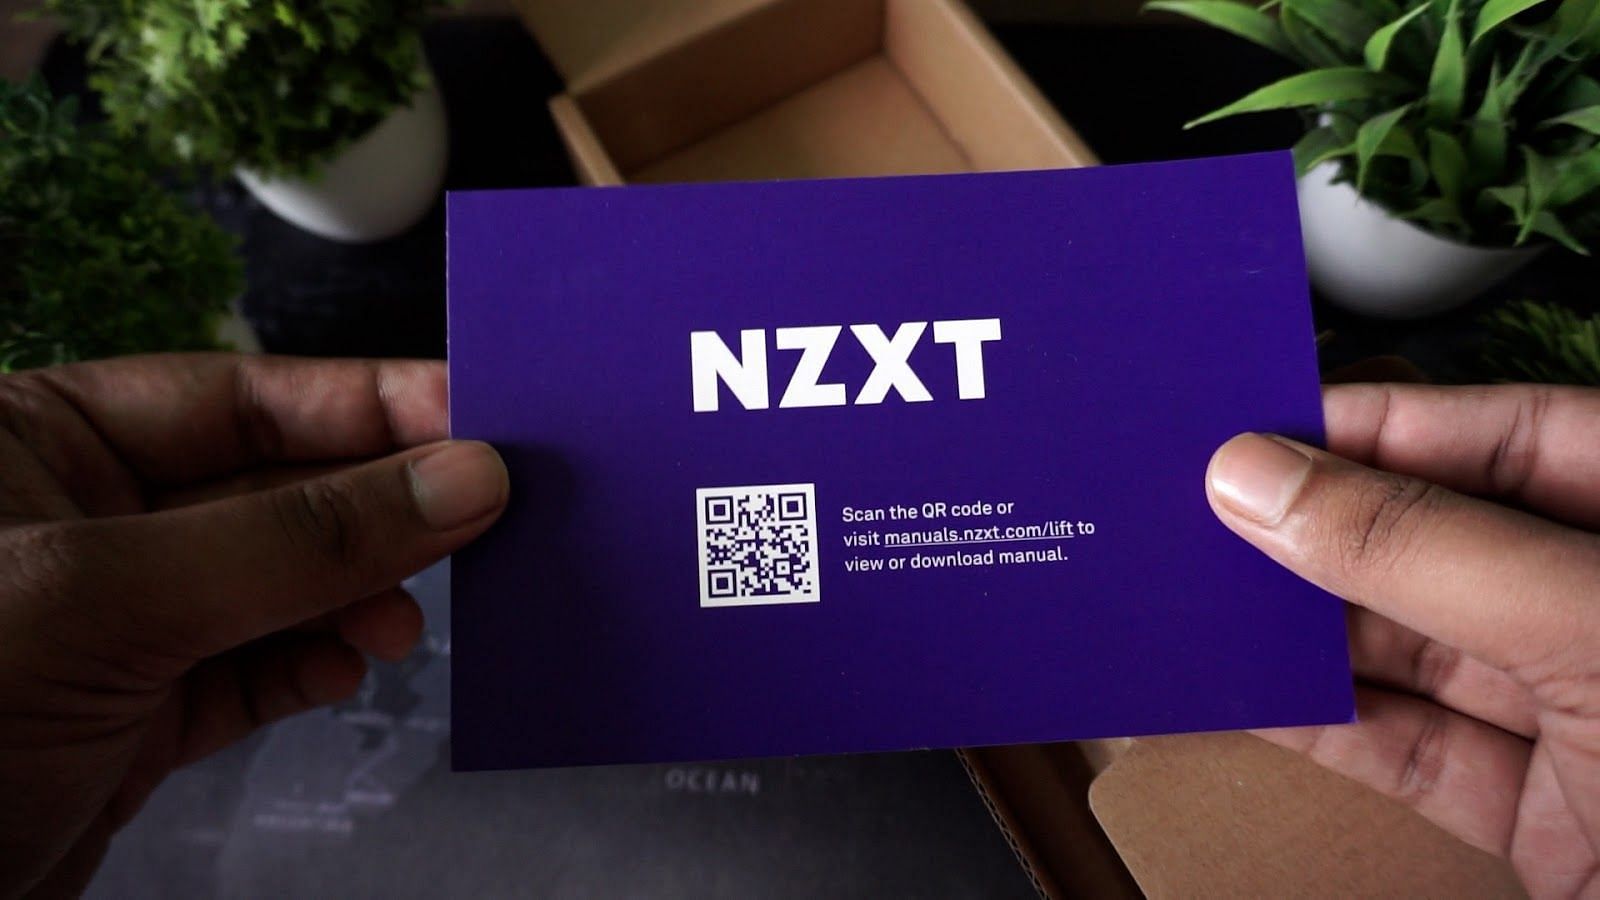 The included paperwork with the NZXT Lift (Image via Sportskeeda)